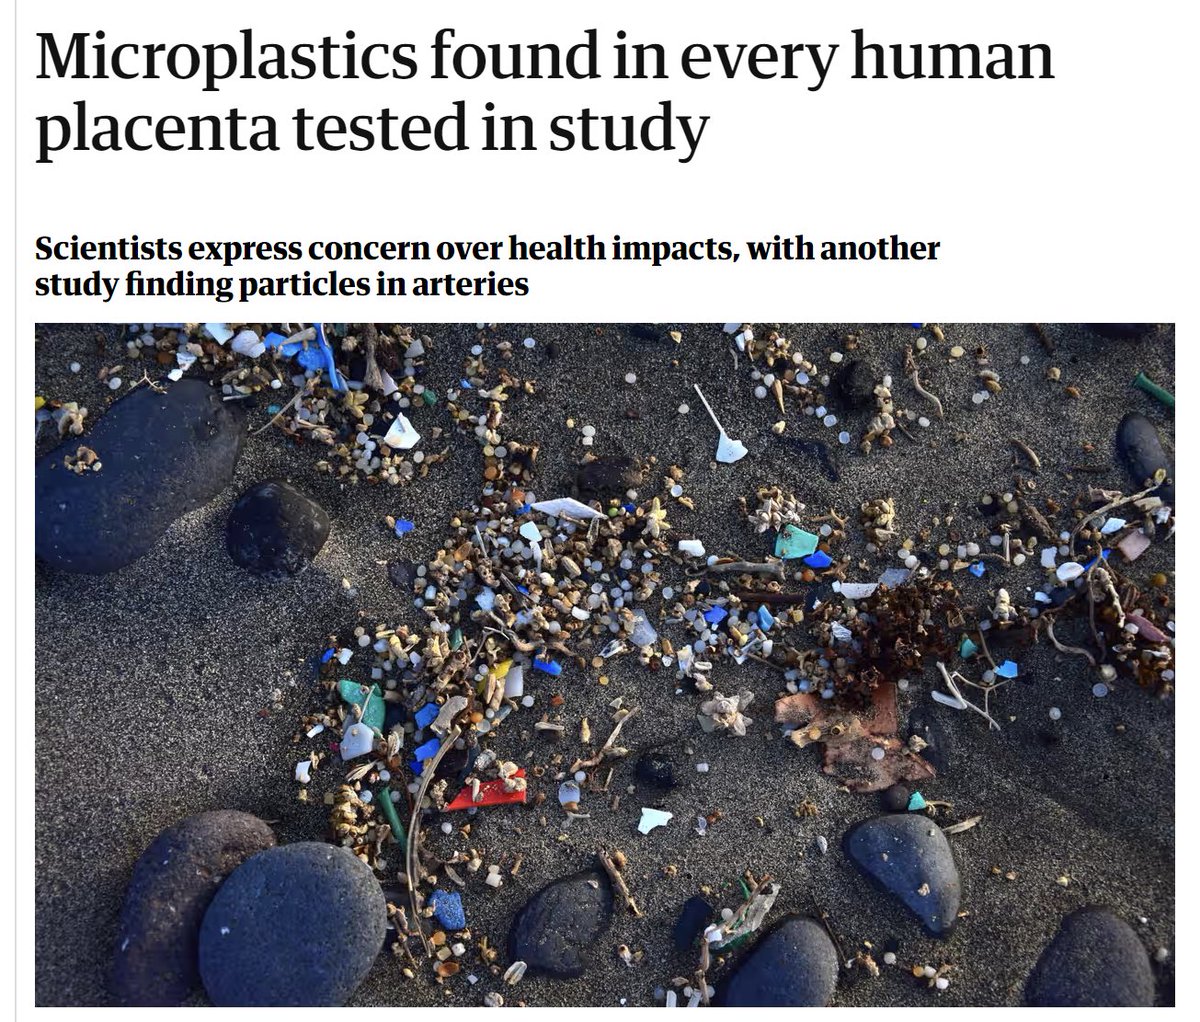 There are micro-plastics in HUMAN PLACENTAS, but if anyone tries to do something about it, Canadian Conservative MPs will mount a campaign against 'woke paper lids' because they are a front for the oil industry. @Lianne_Rood